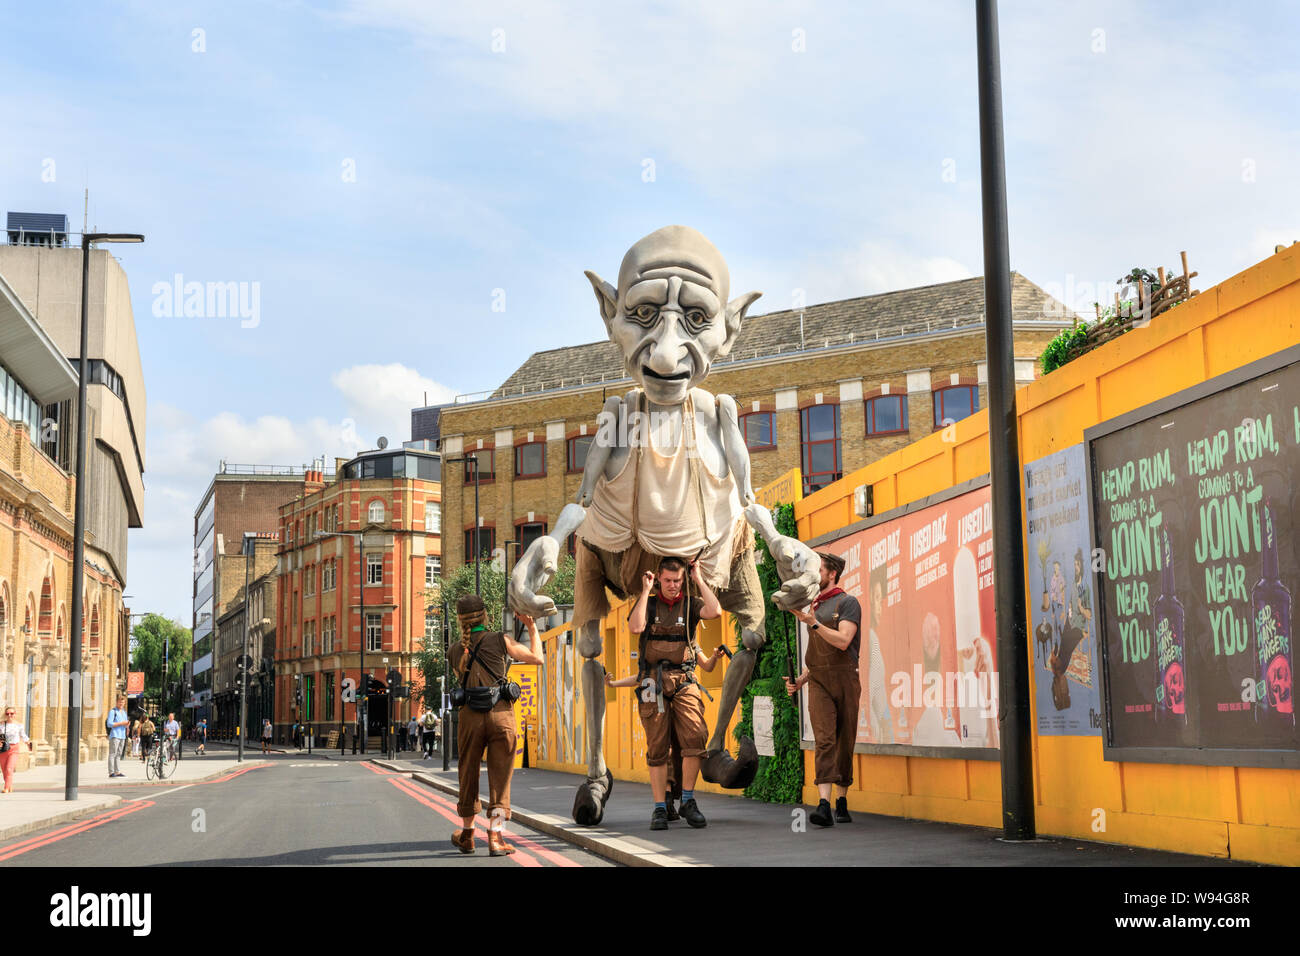 Gnomus, Caretaker of the Earth, a giant gentle green giant puppet by 'Puppets with Guts' puppeteers, performance outside in Southwark, London, UK Stock Photo